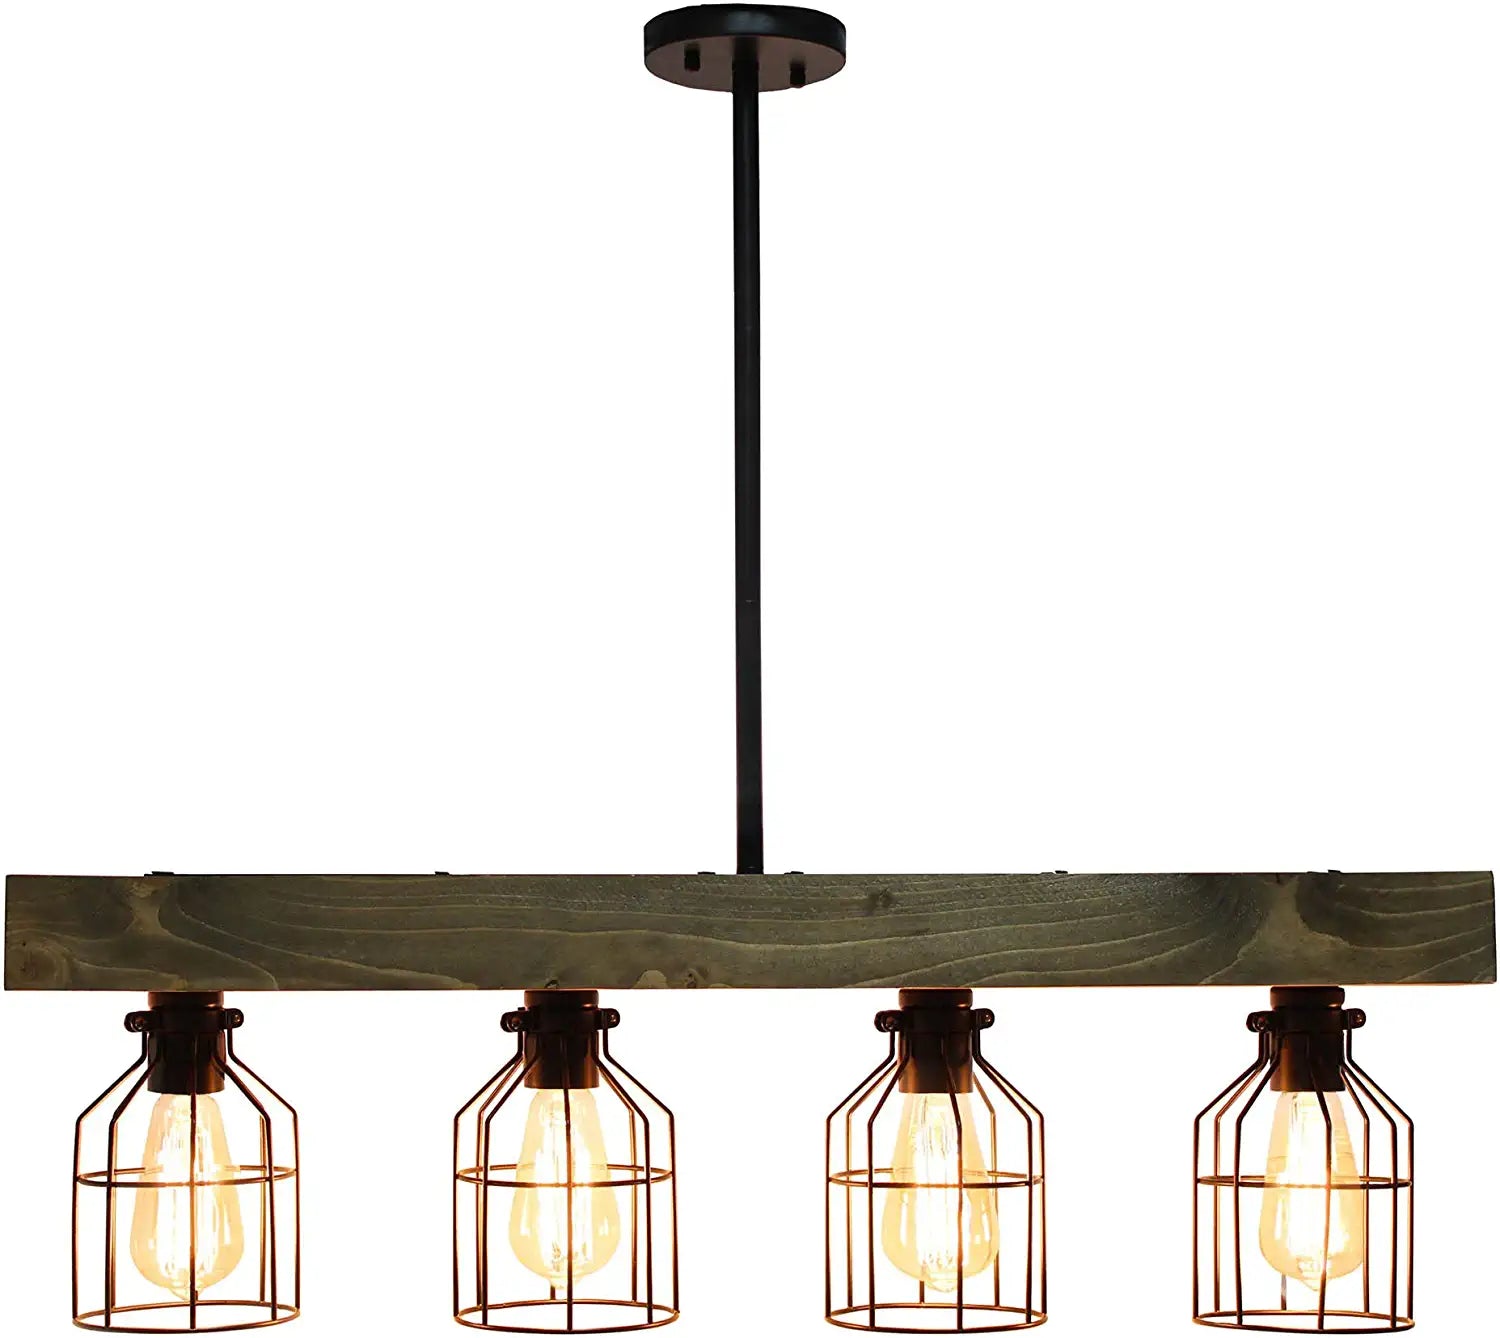 Lalia Home 4 Light Rustic Farmhouse Pendant with Restored Wood Beam and Matte Black Metal Cage Shade